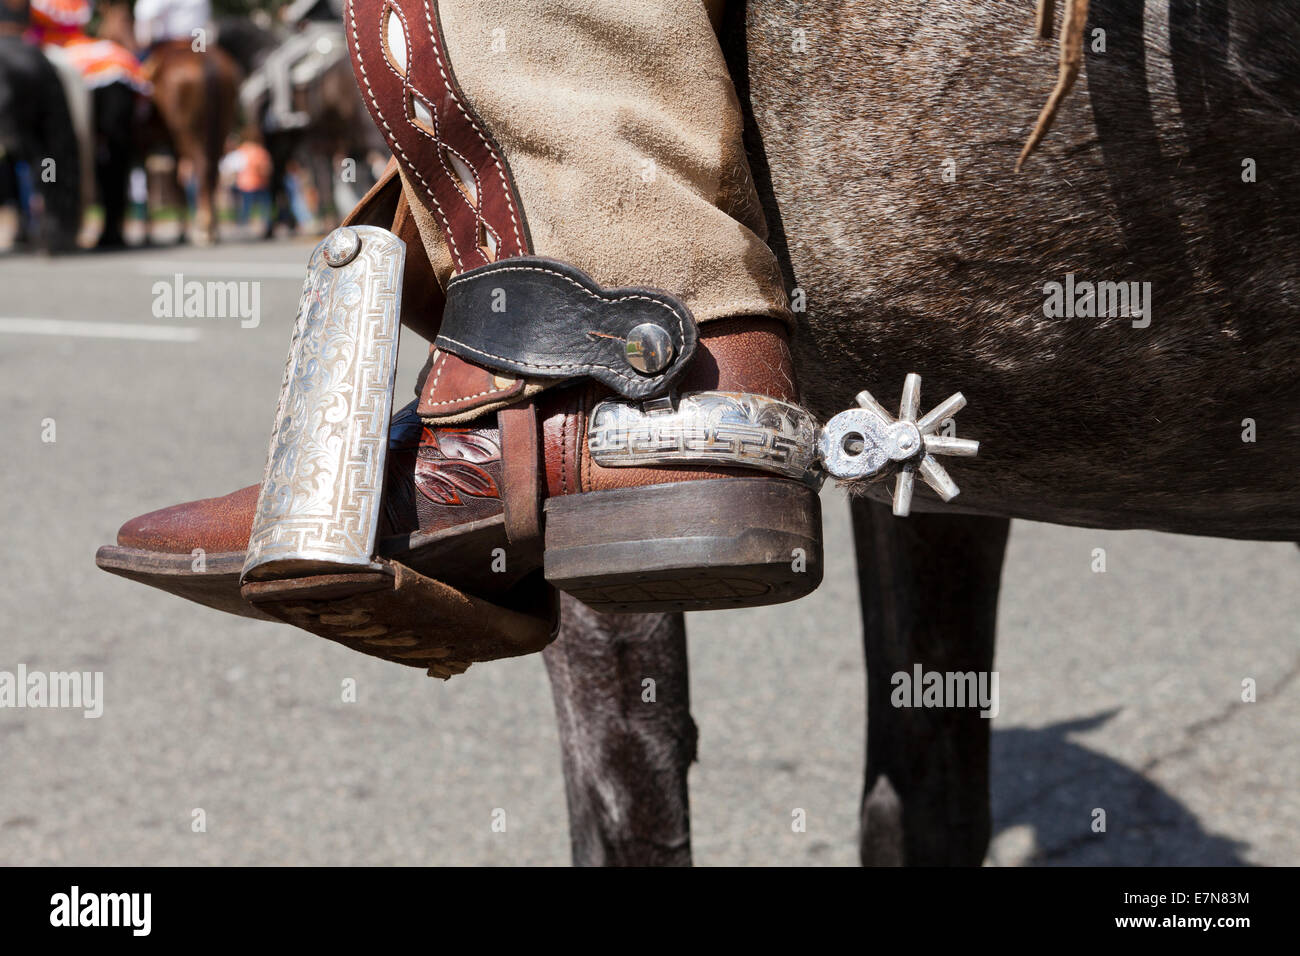 closeup of Western-style cowboy spur on riding boots - USA Stock Photo